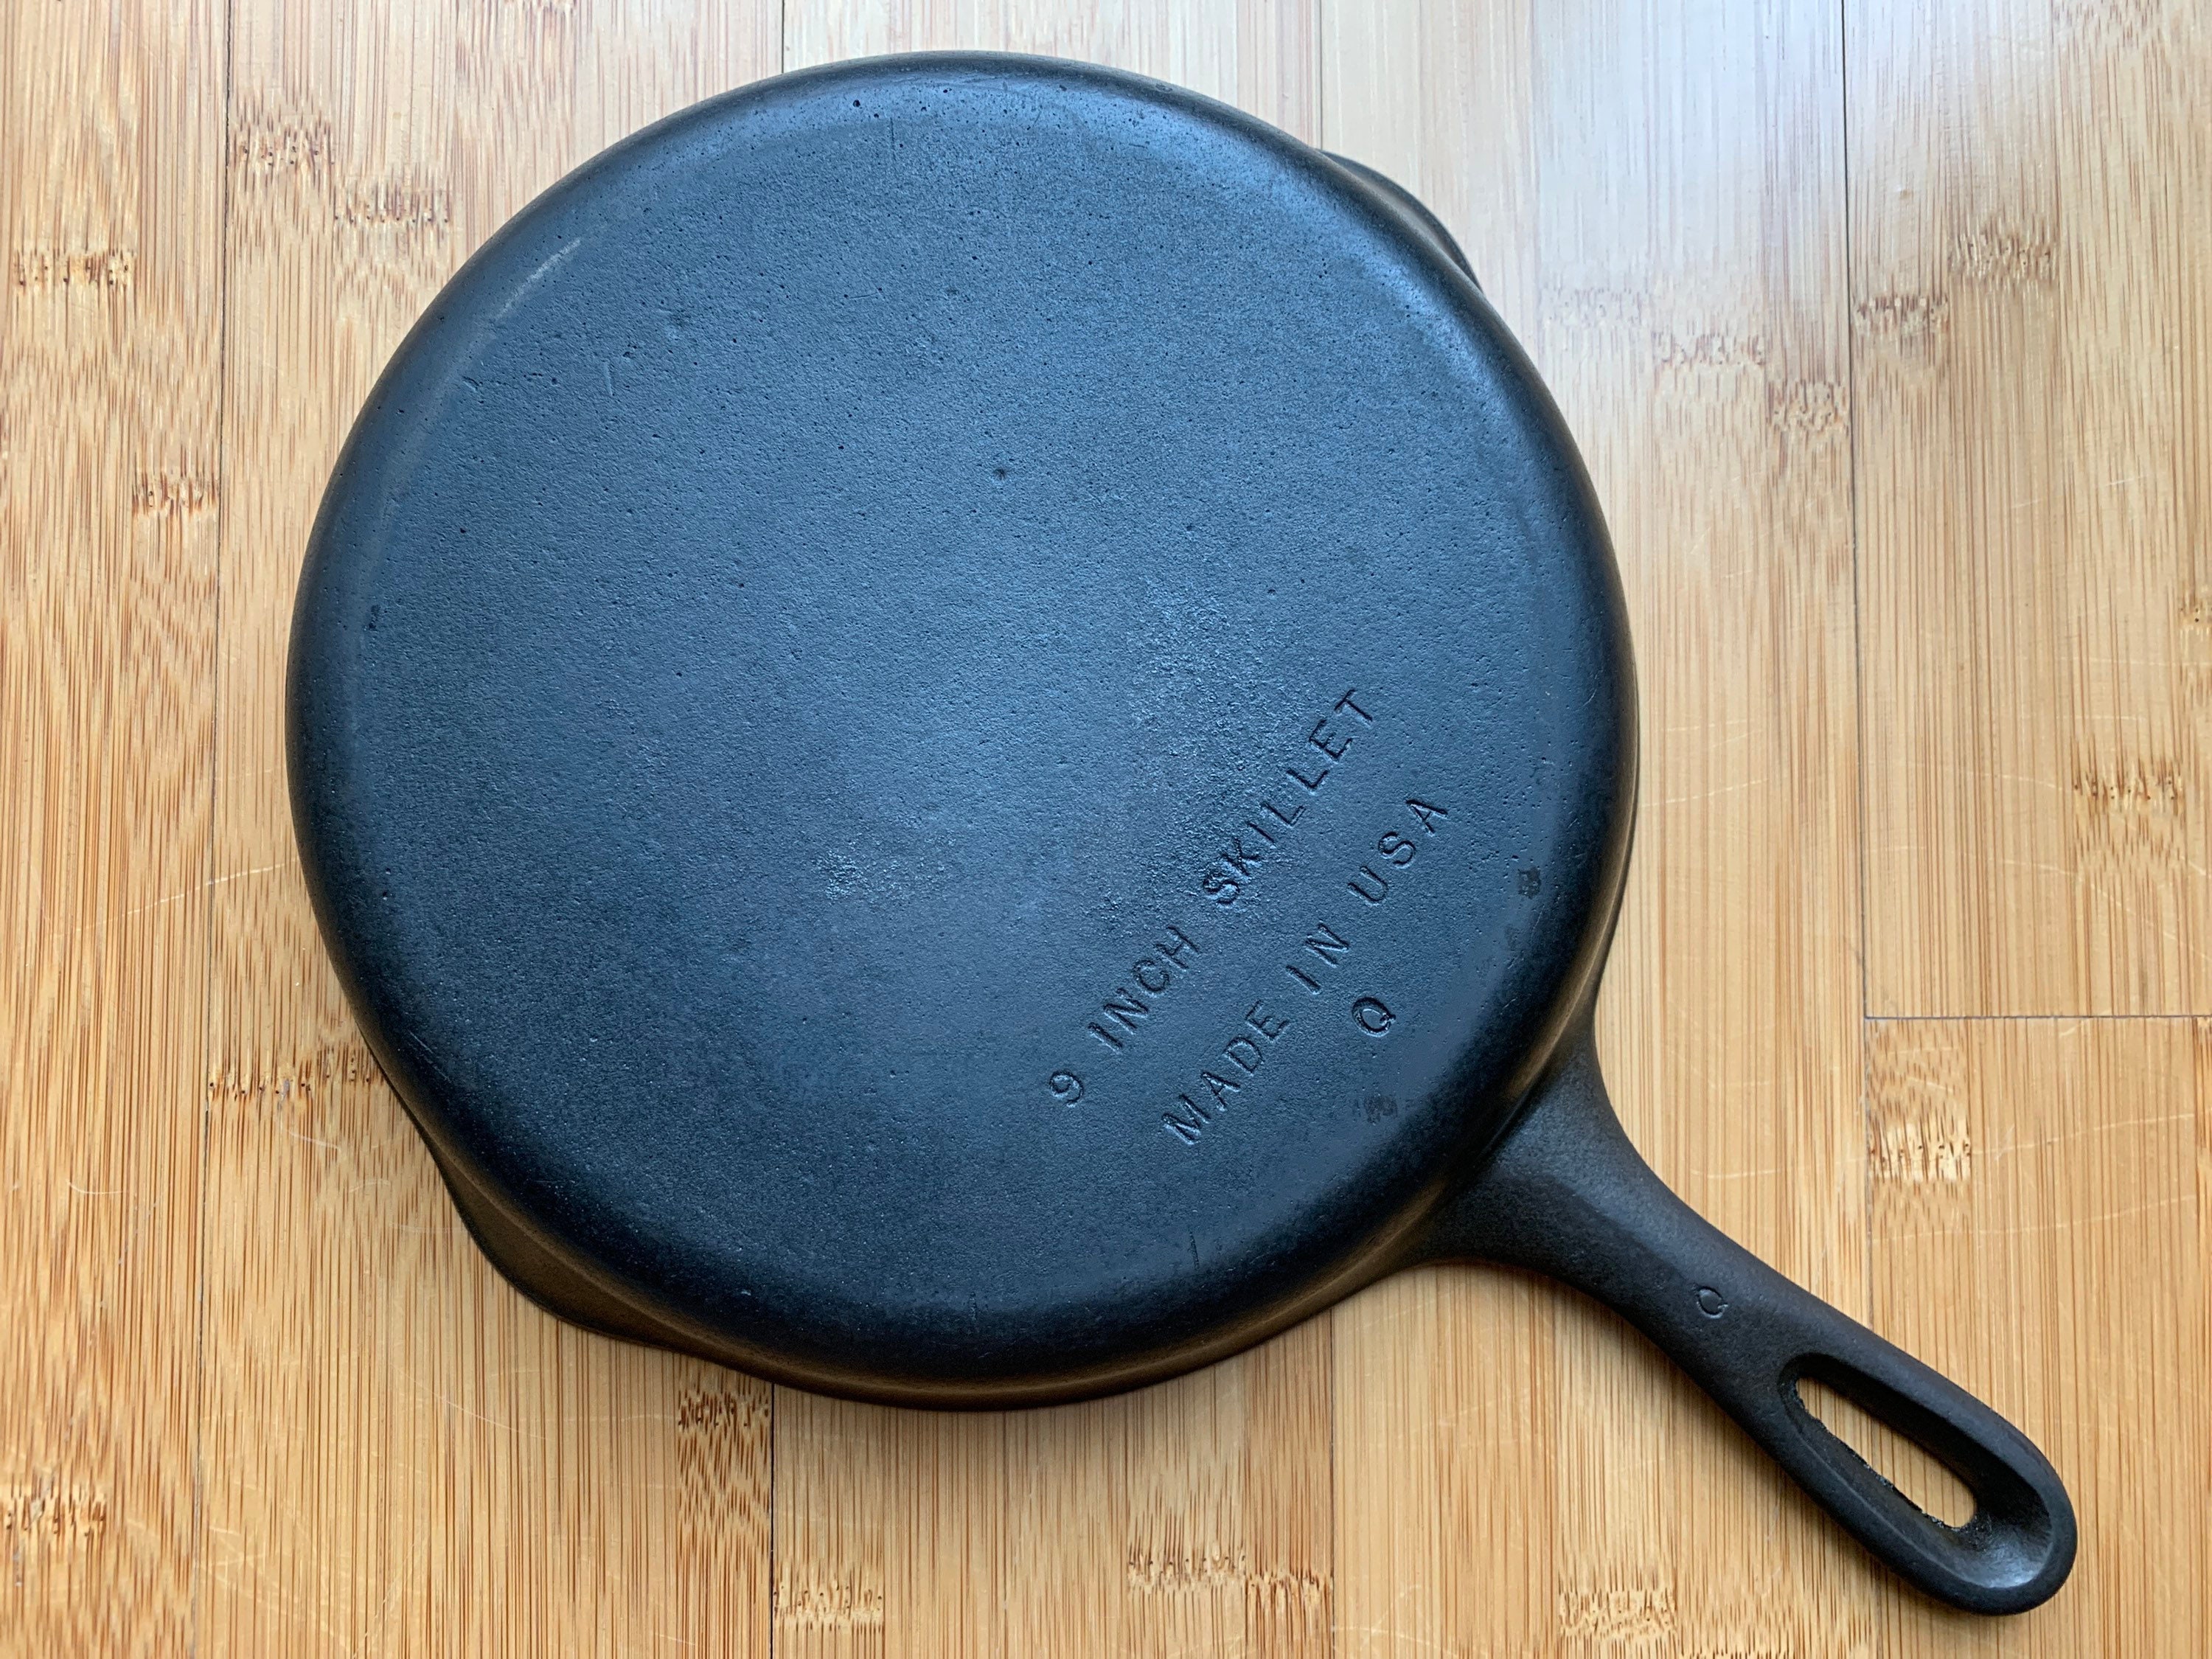 Wagner Ware 6 Cast Iron Skillet Unmarked Restored 